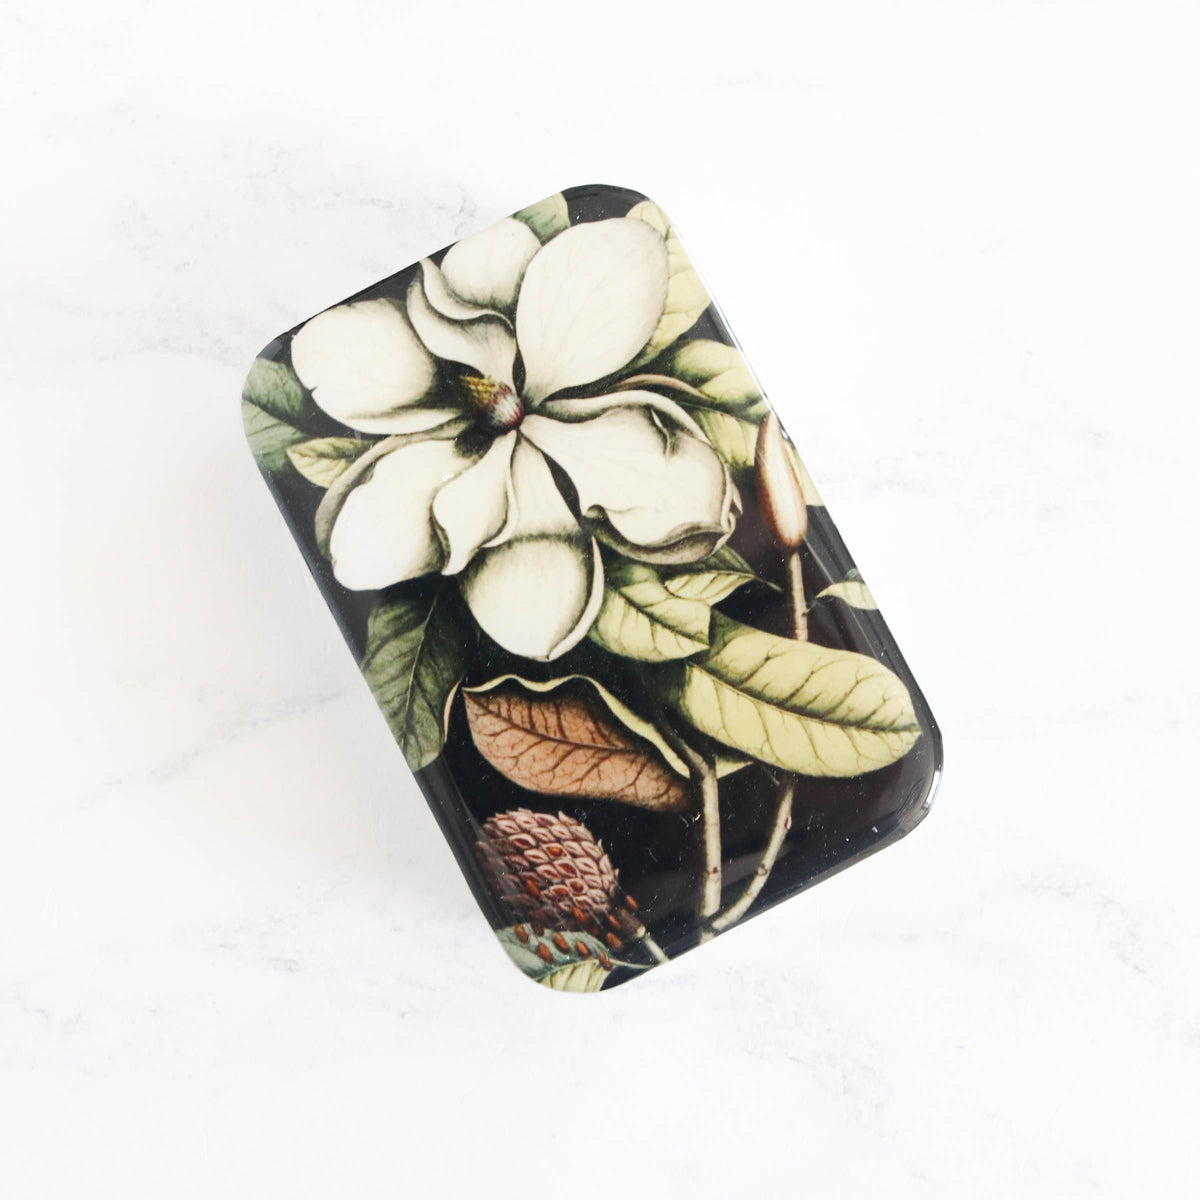 Vintage-Inspired Storage and Notions Tins - Magnolia